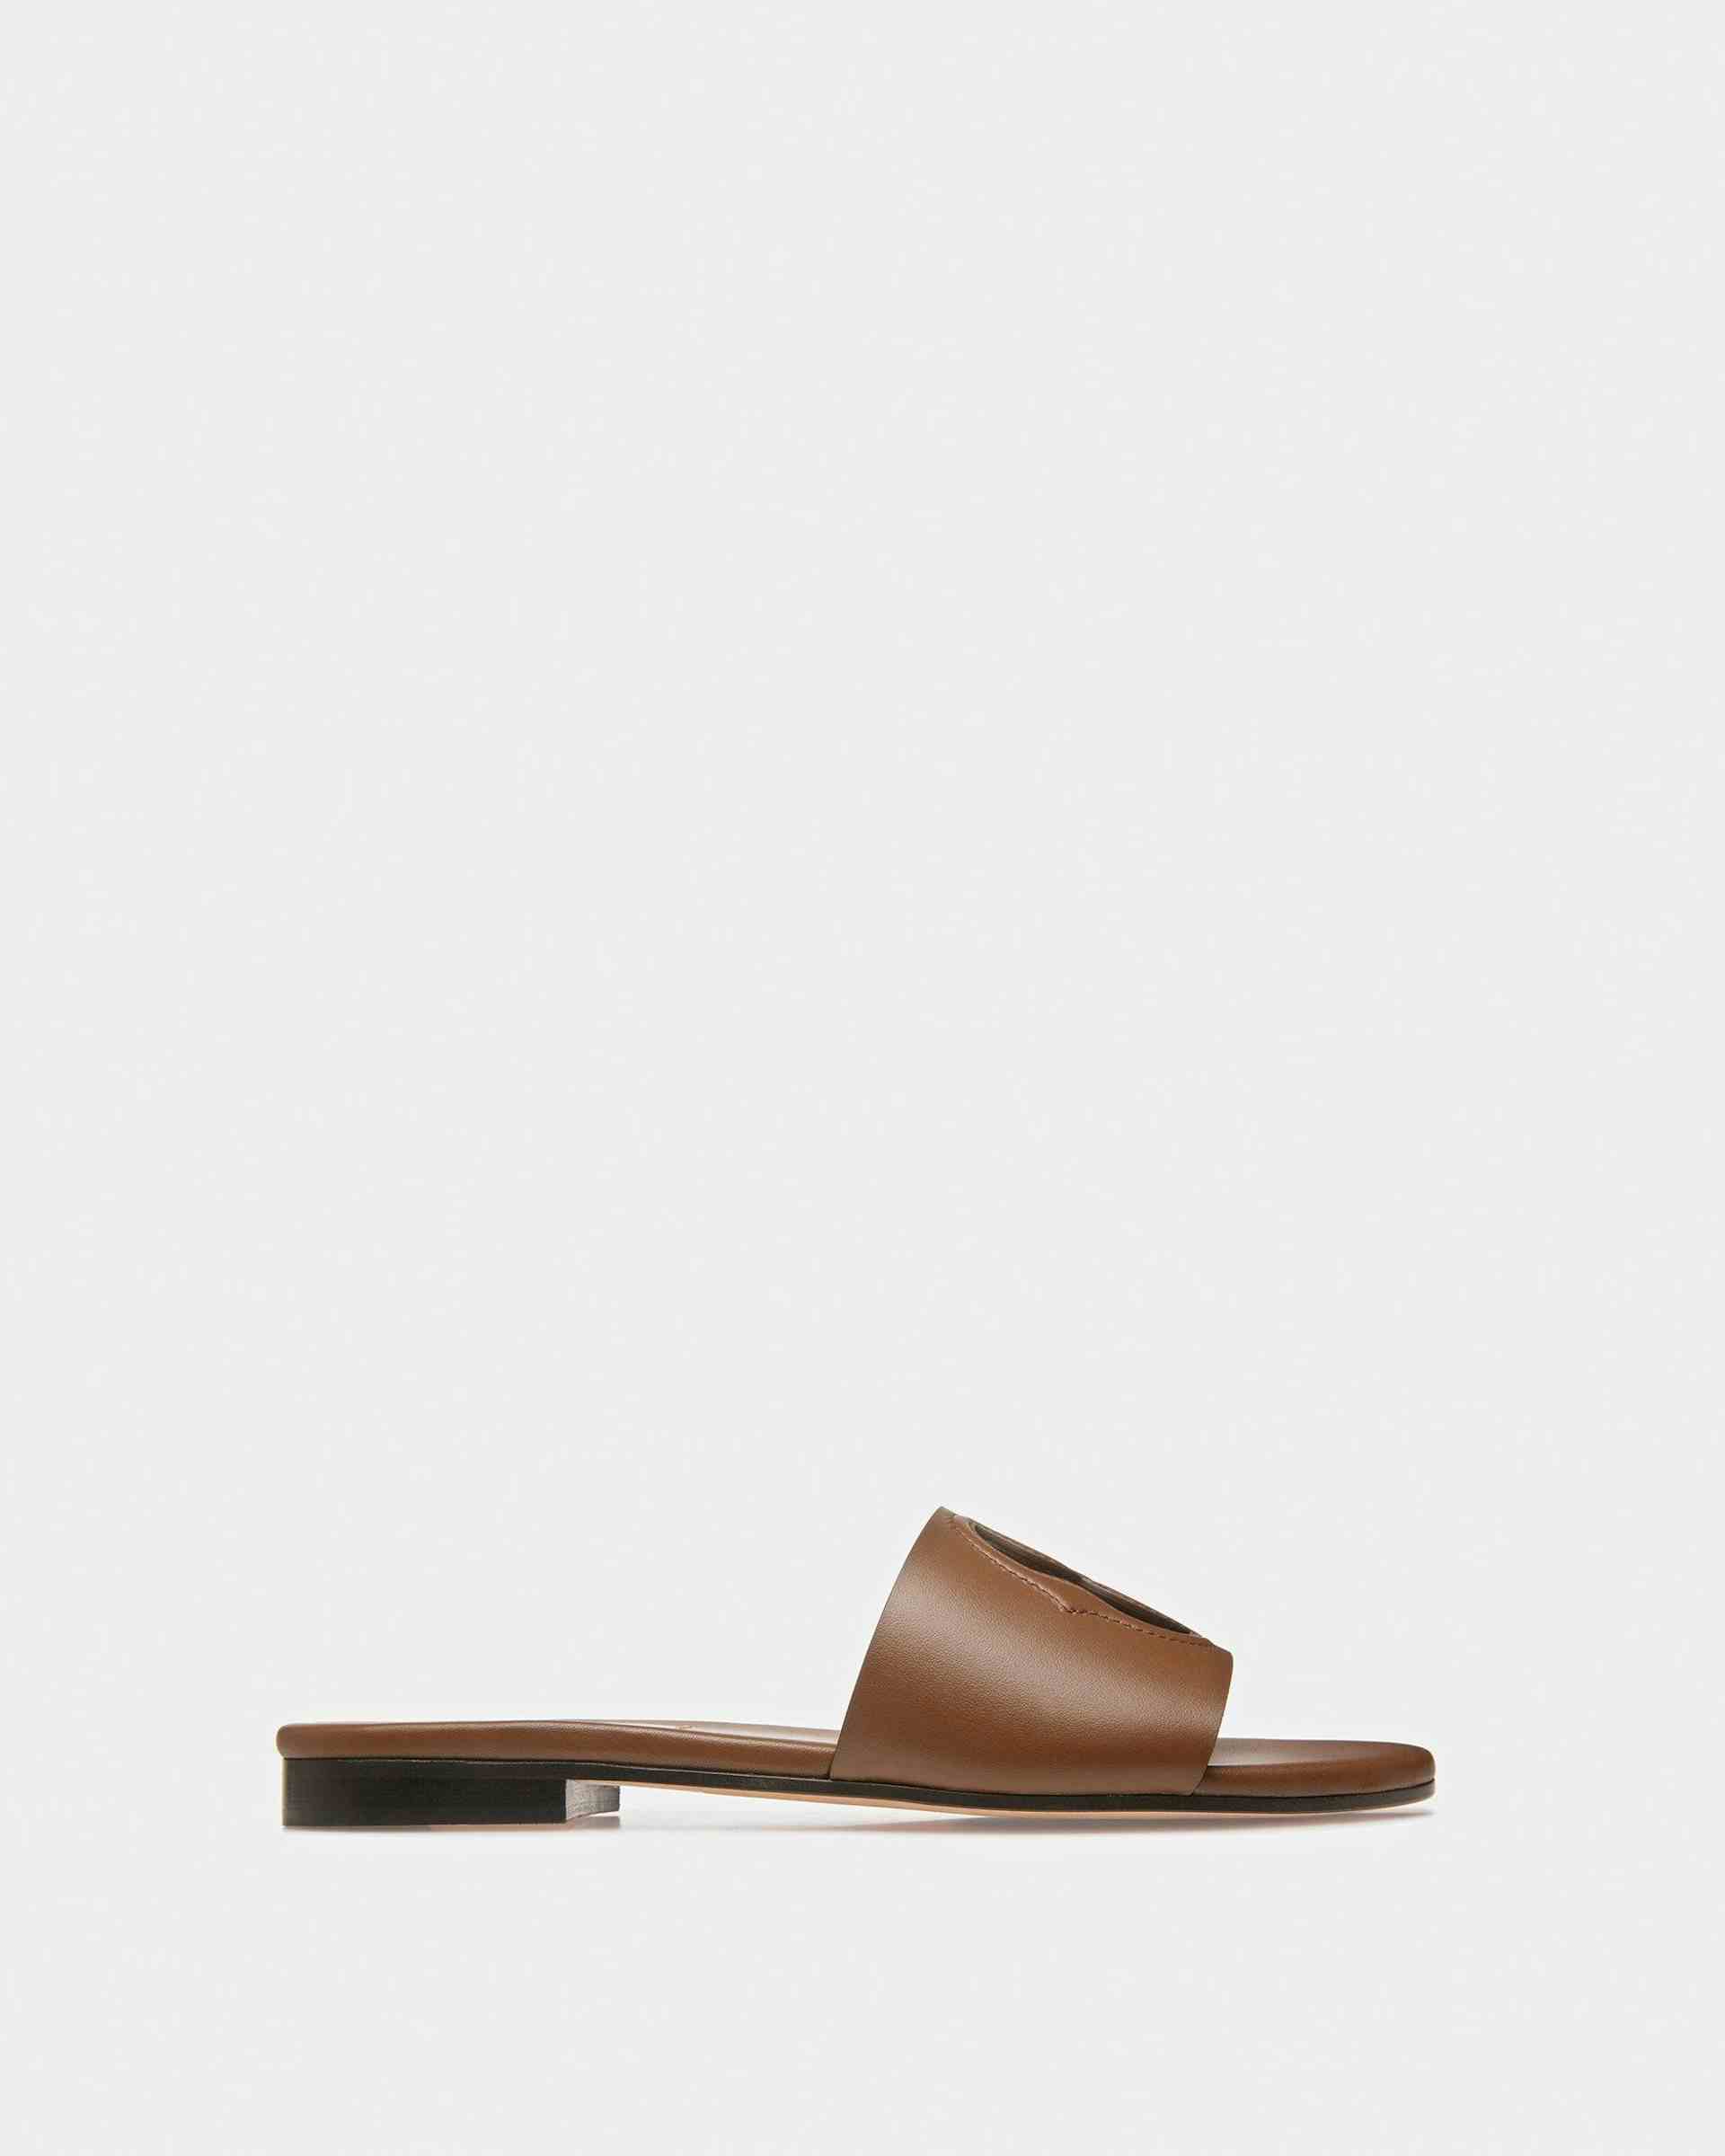 Emblem Slides In Brown Leather - Women's - Bally